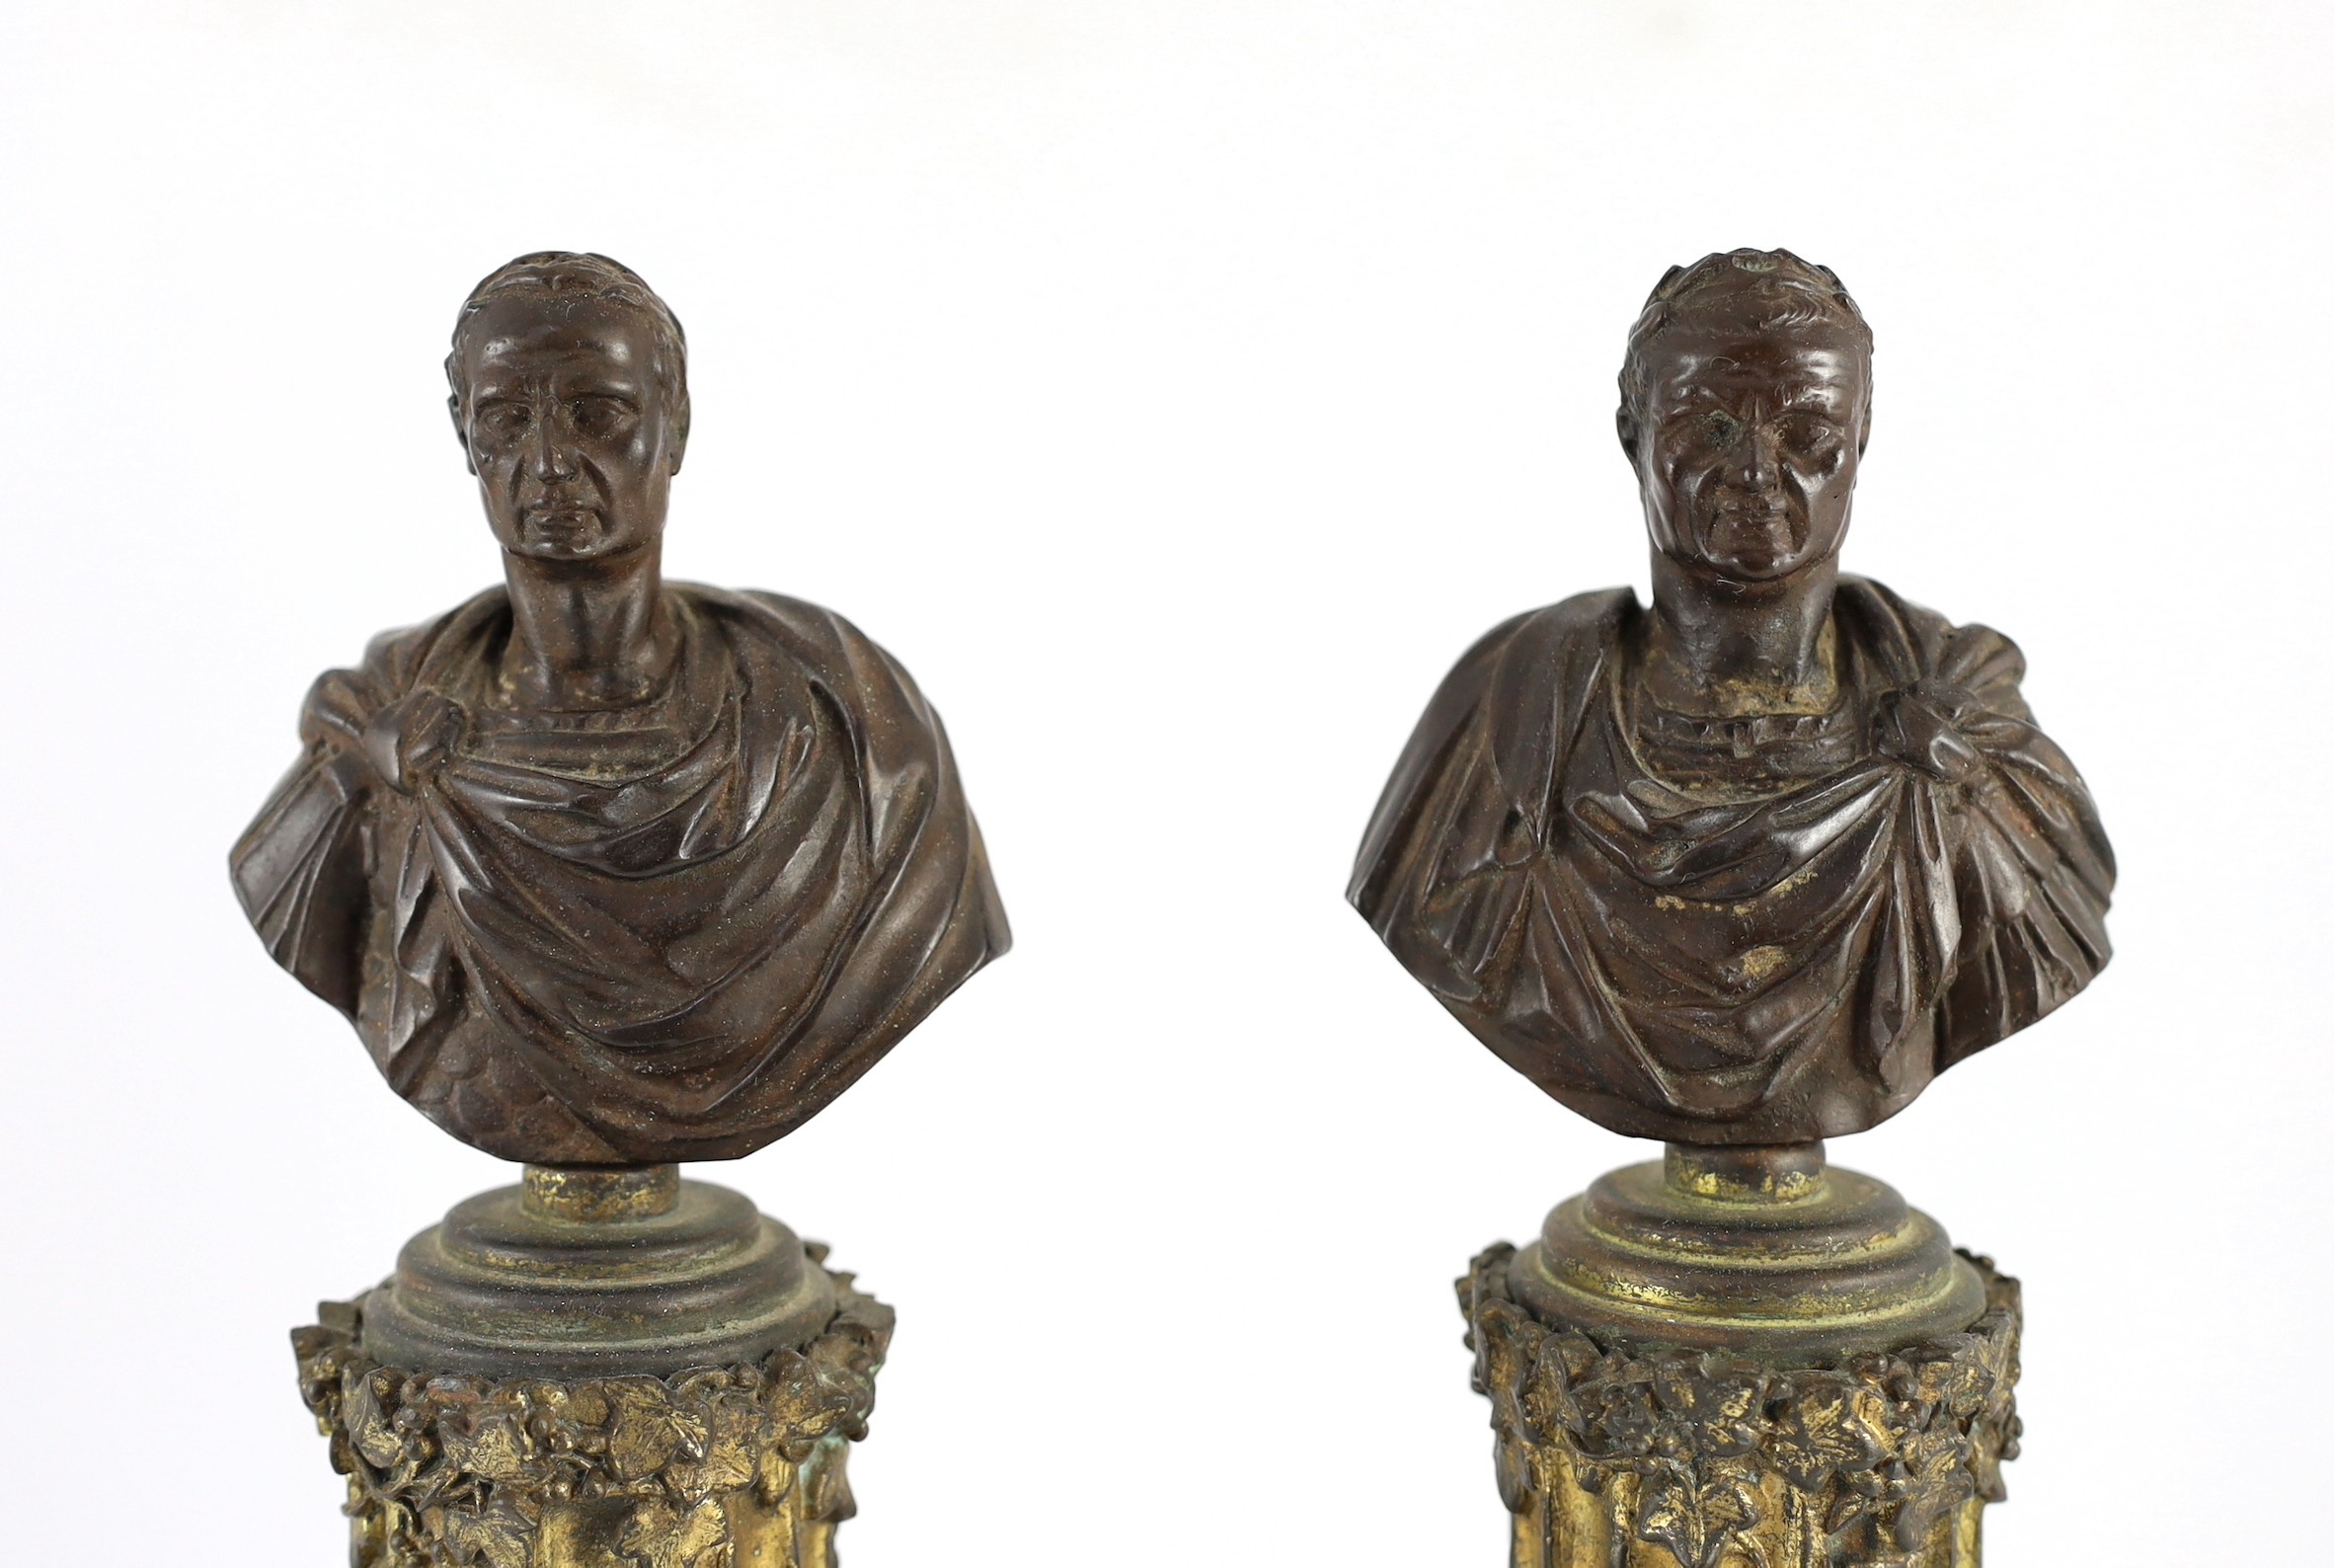 After the Antique. A pair of bronze busts of Roman Emperors, width of bases 12cm height 45cm